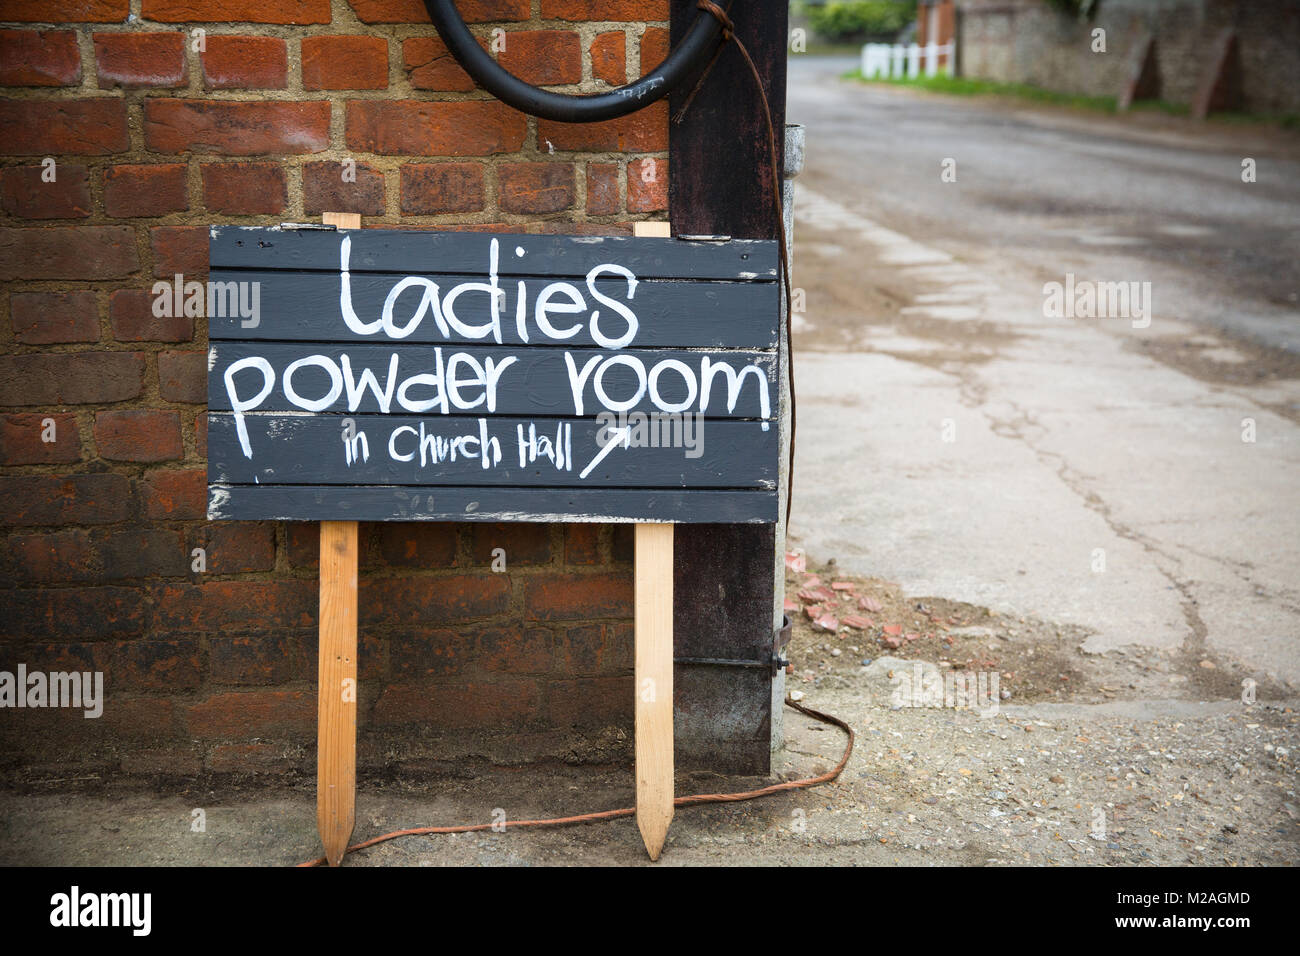 Wooden sign showing direction to ladies powder room Stock Photo